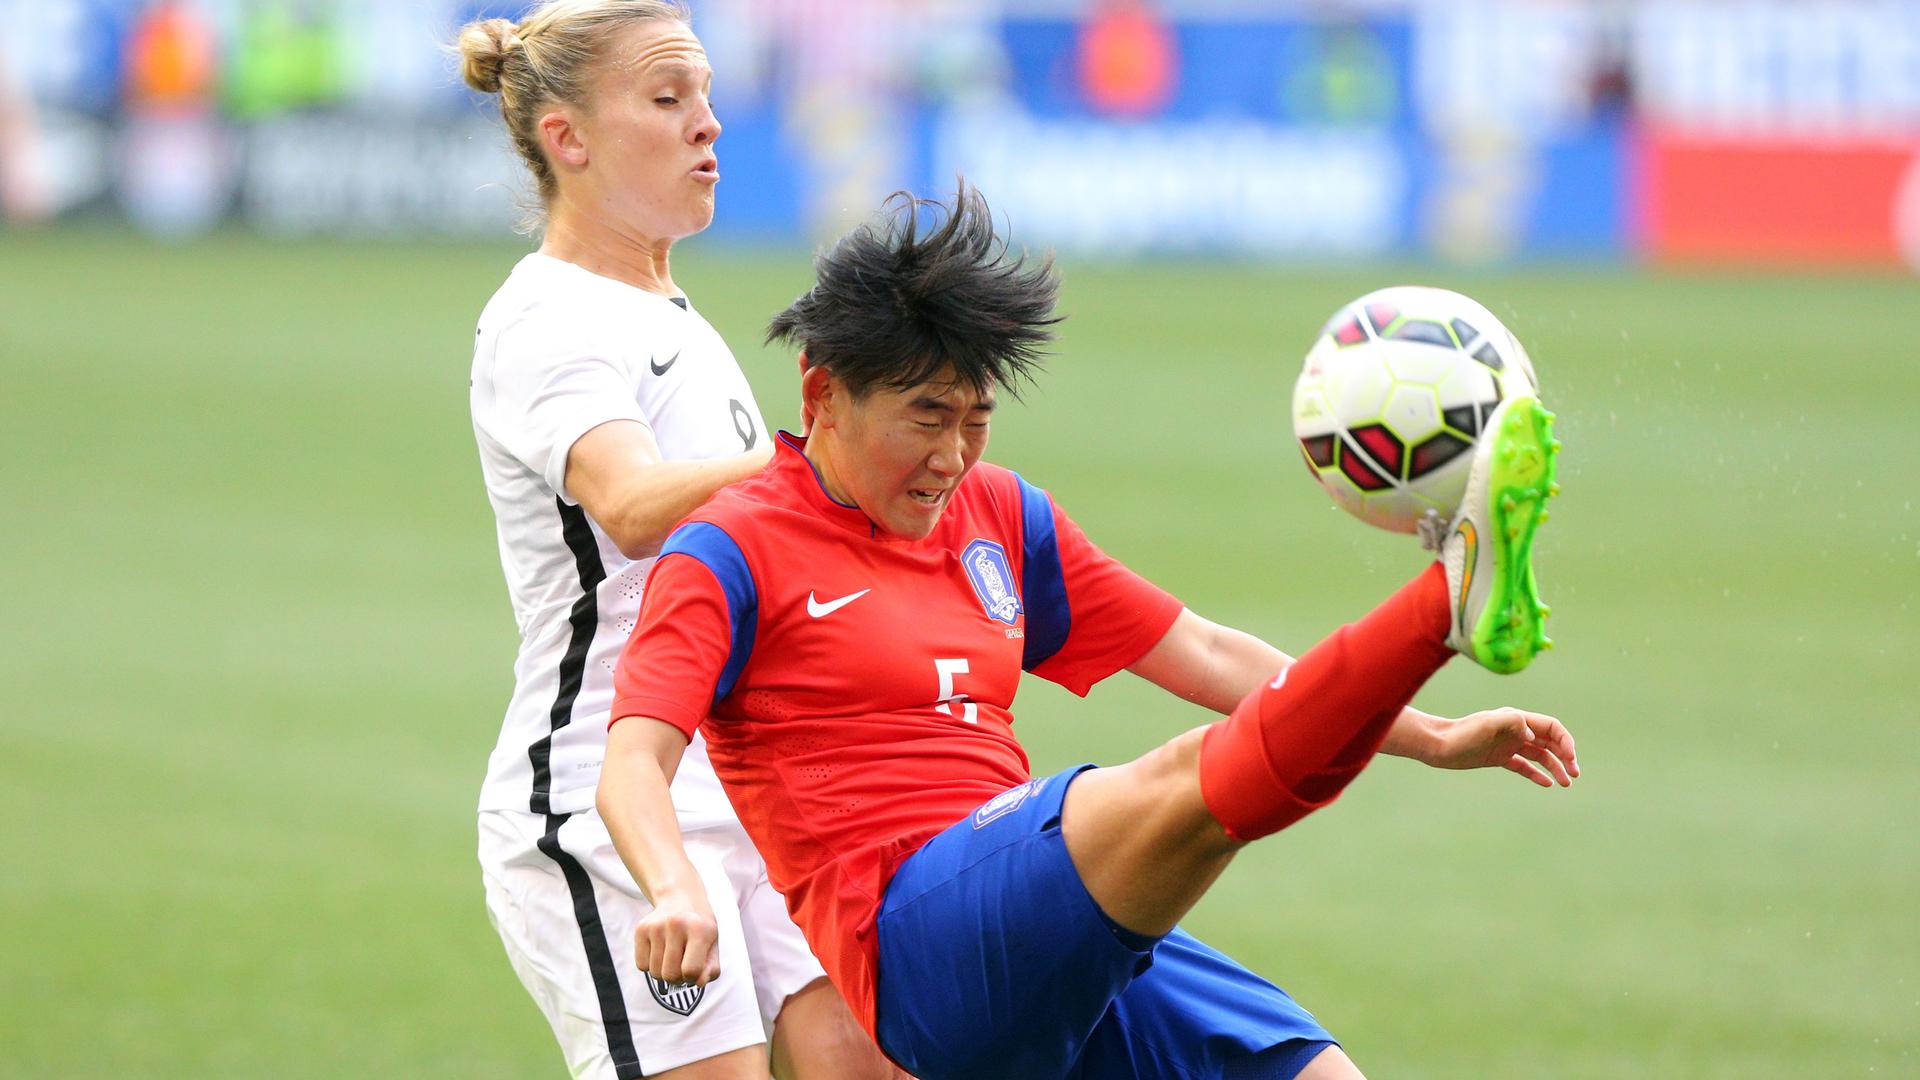 Korea defender Kim Sooyun (5) kicks the ball against USA forward Amy Rodriguez (8) during the second half at Red Bull Arena.